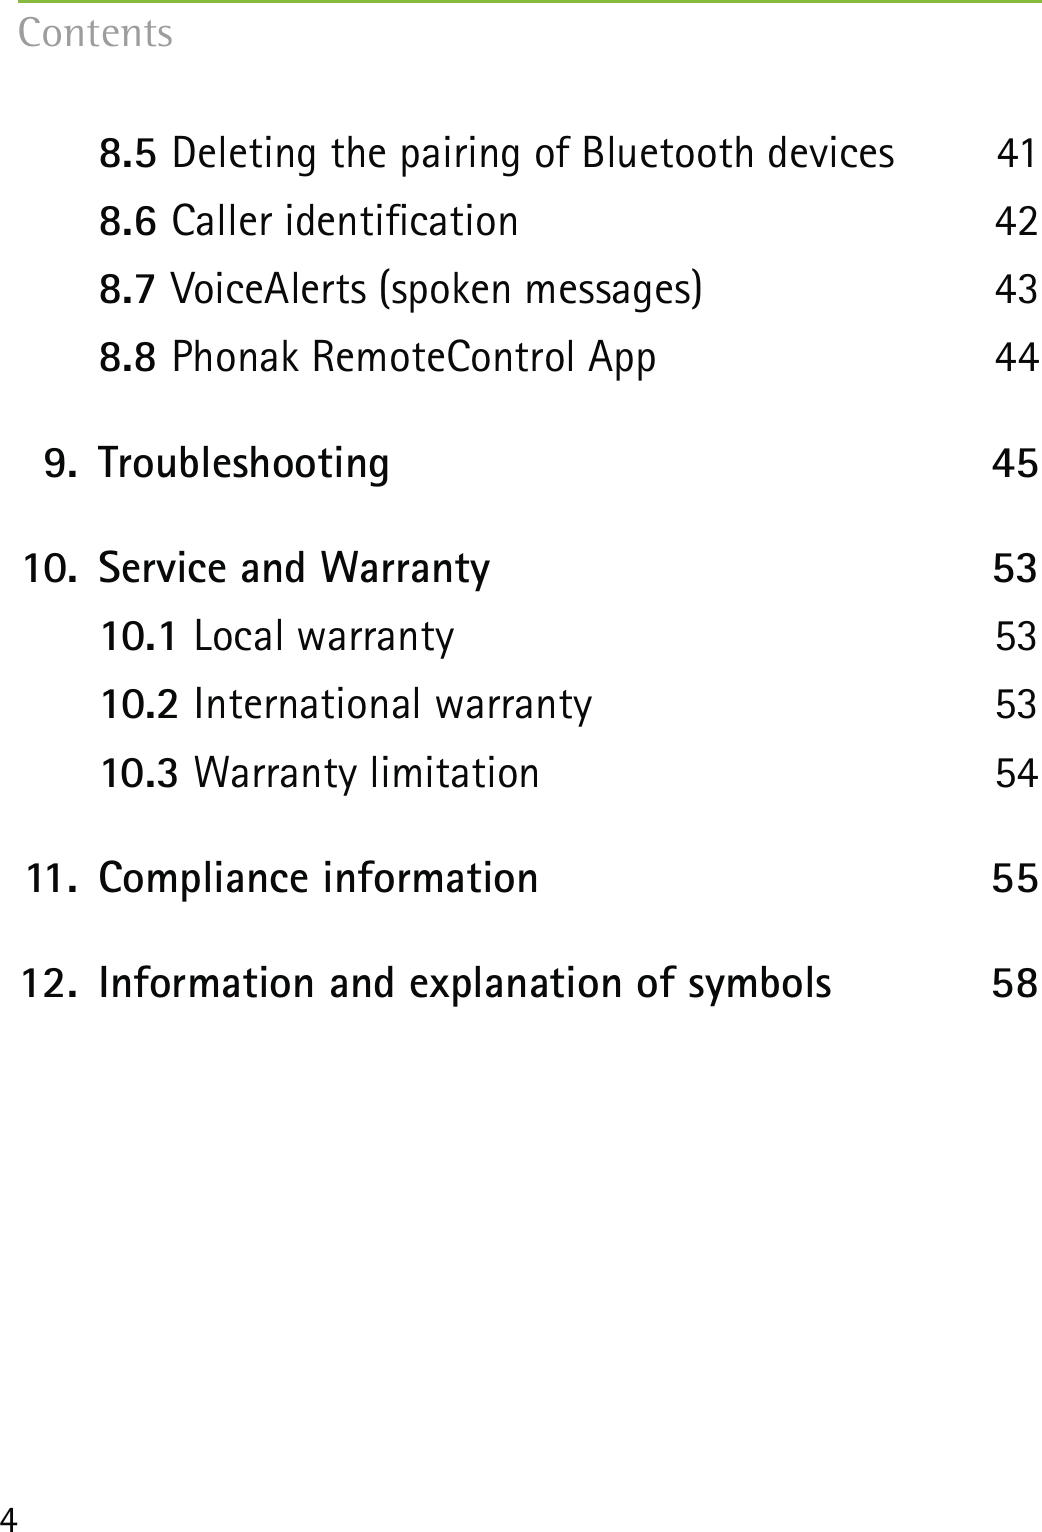 4  8.5 Deleting the pairing of Bluetooth devices  41  8.6 Caller identication  42  8.7 VoiceAlerts (spoken messages)  43  8.8 Phonak RemoteControl App  44 9.  Troubleshooting  45 10.  Service and Warranty  53  10.1 Local warranty  53  10.2 International warranty 53  10.3 Warranty limitation 54 11.  Compliance information  55 12.  Information and explanation of symbols  58Contents